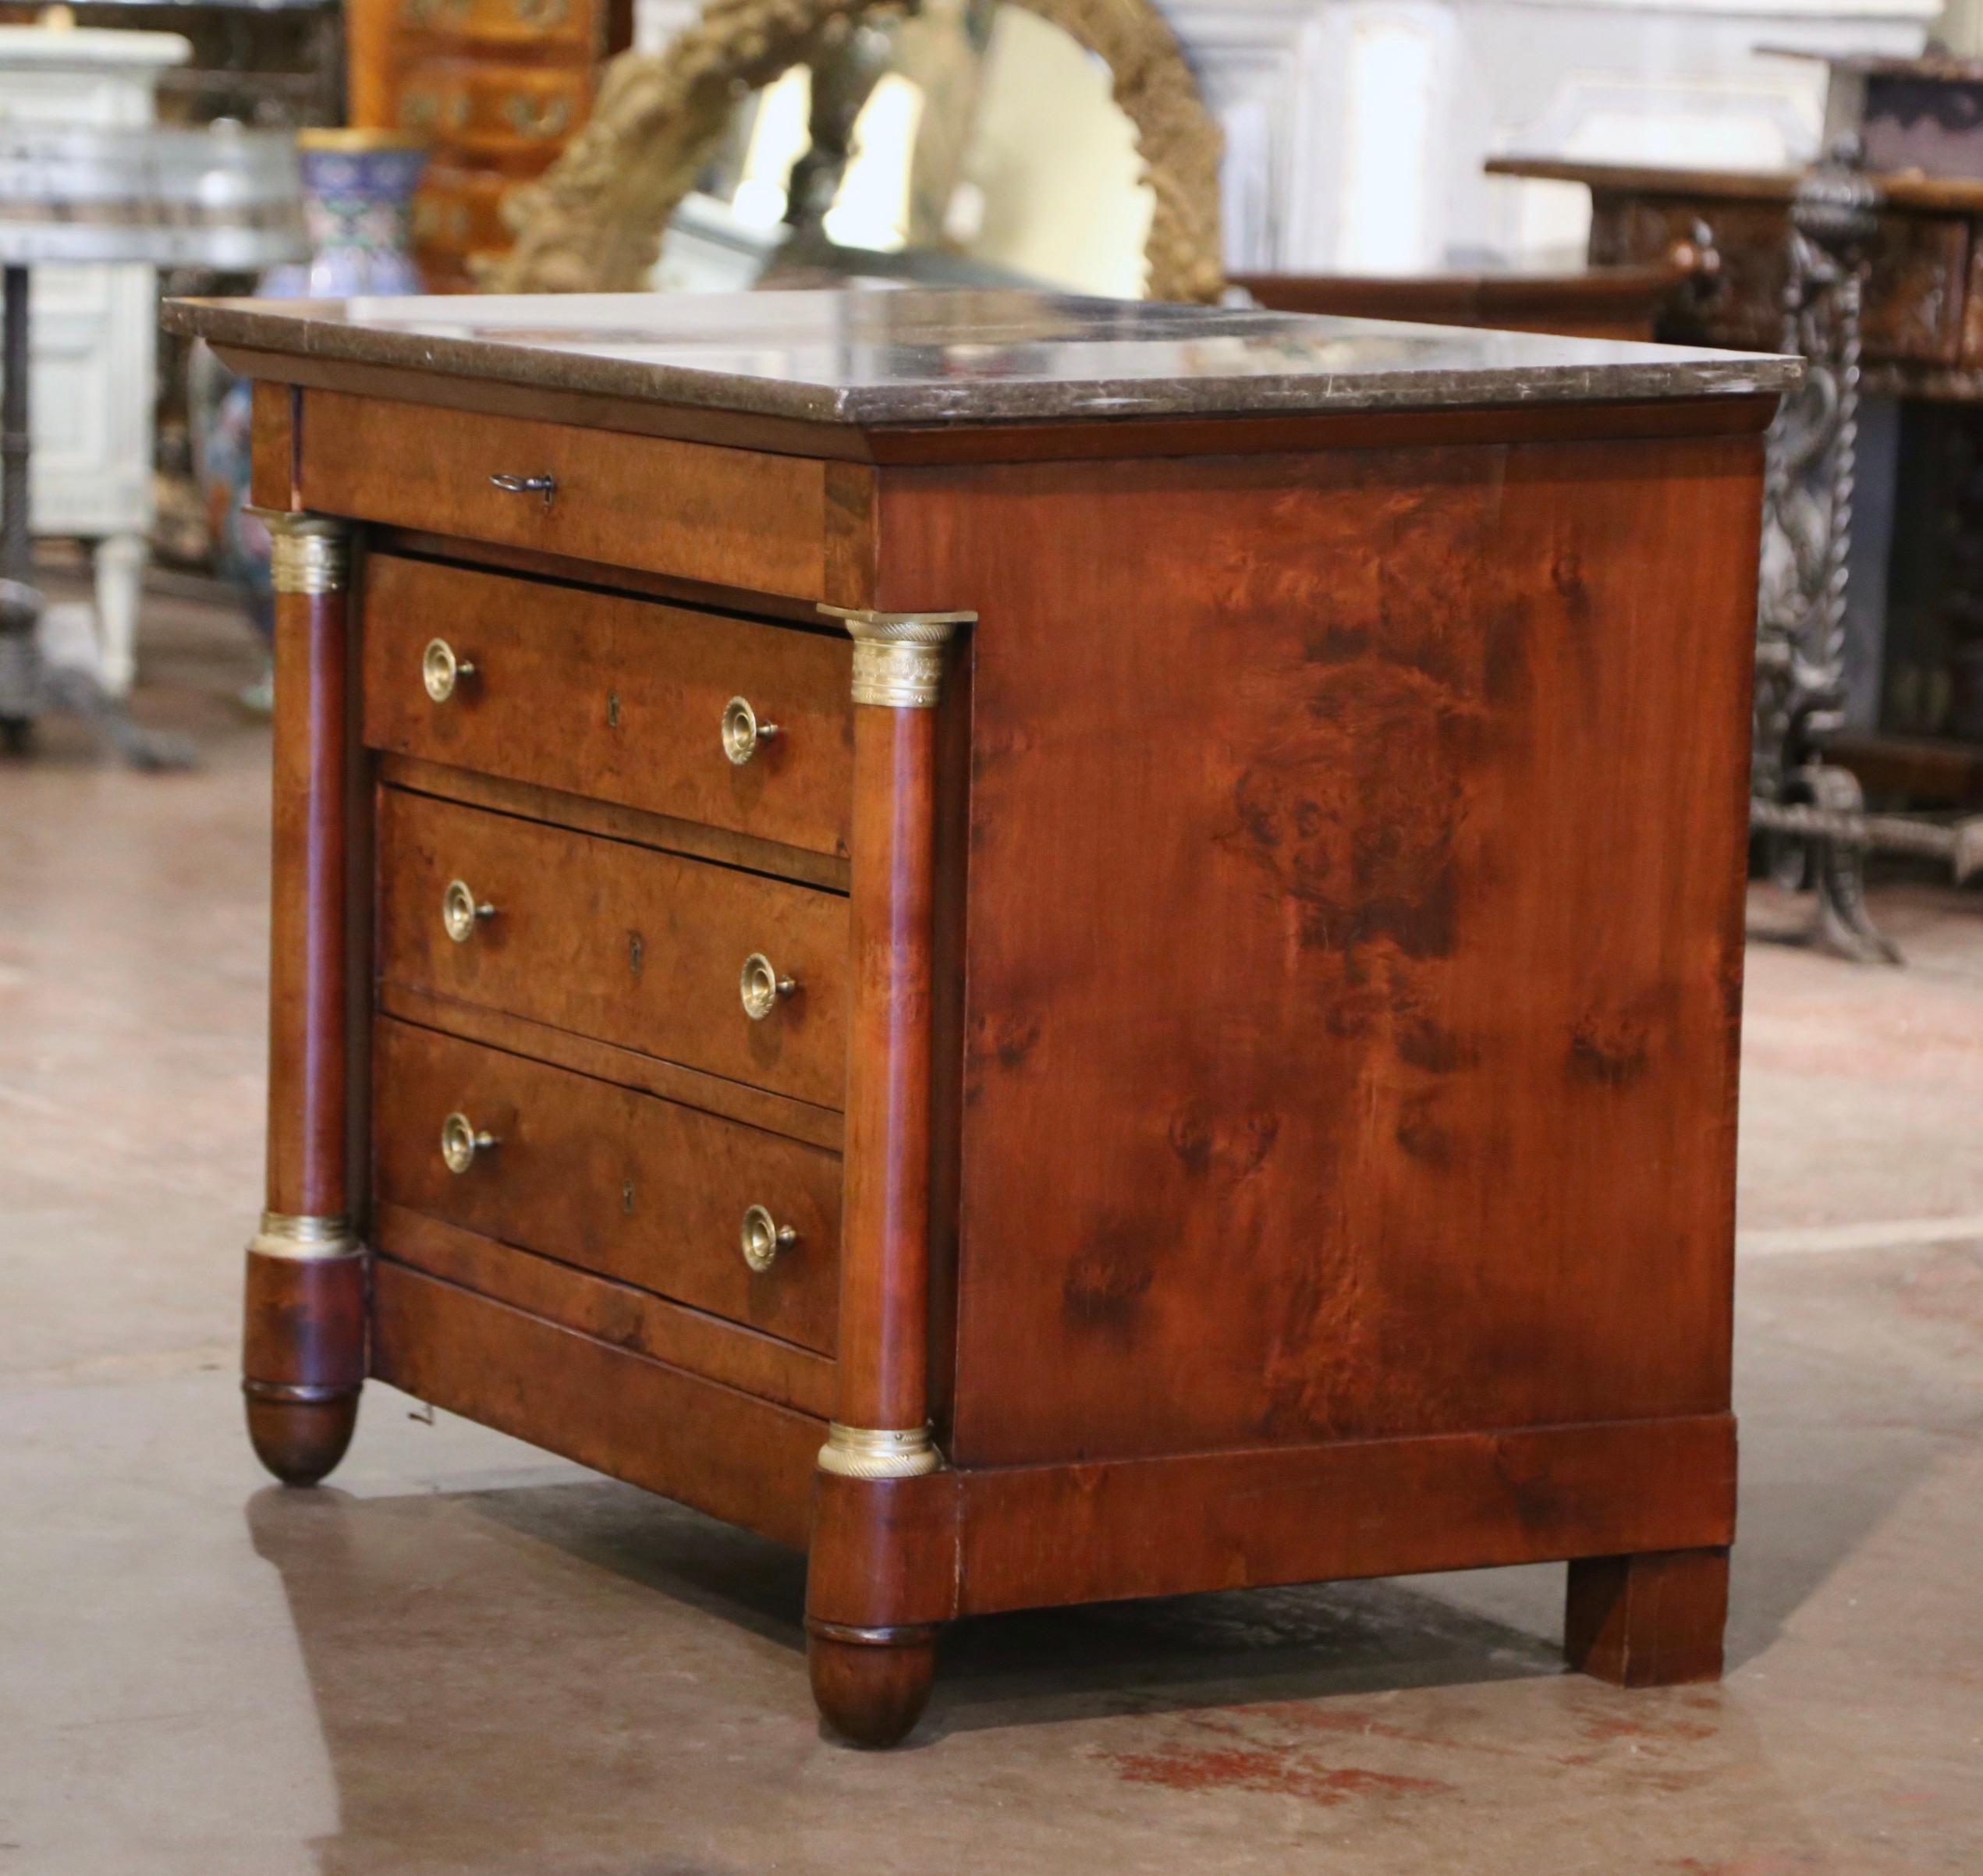 19th Century French Empire Marble Top Carved Veneer Elm Commode Chest of Drawers For Sale 7